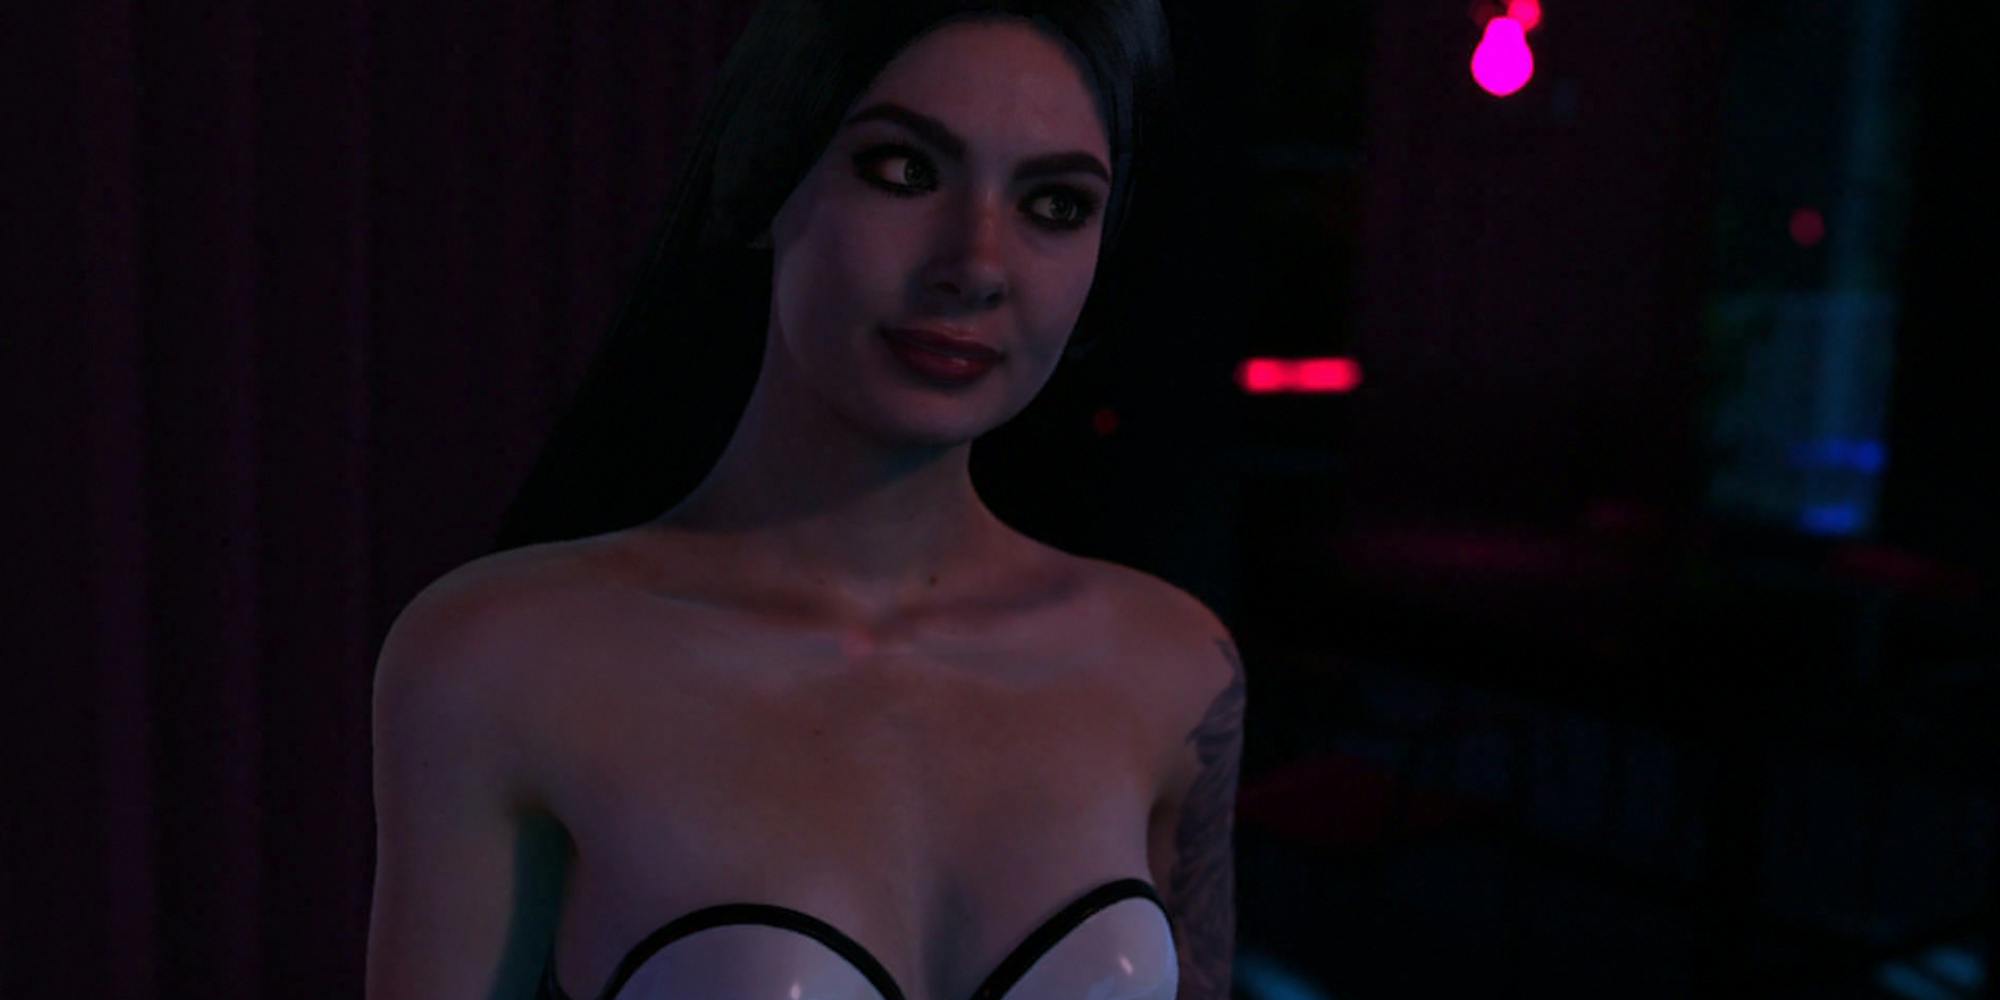 Banned Erotic Porn - Steam Bans Adult VR Game Holodexxx For 'Pornography'